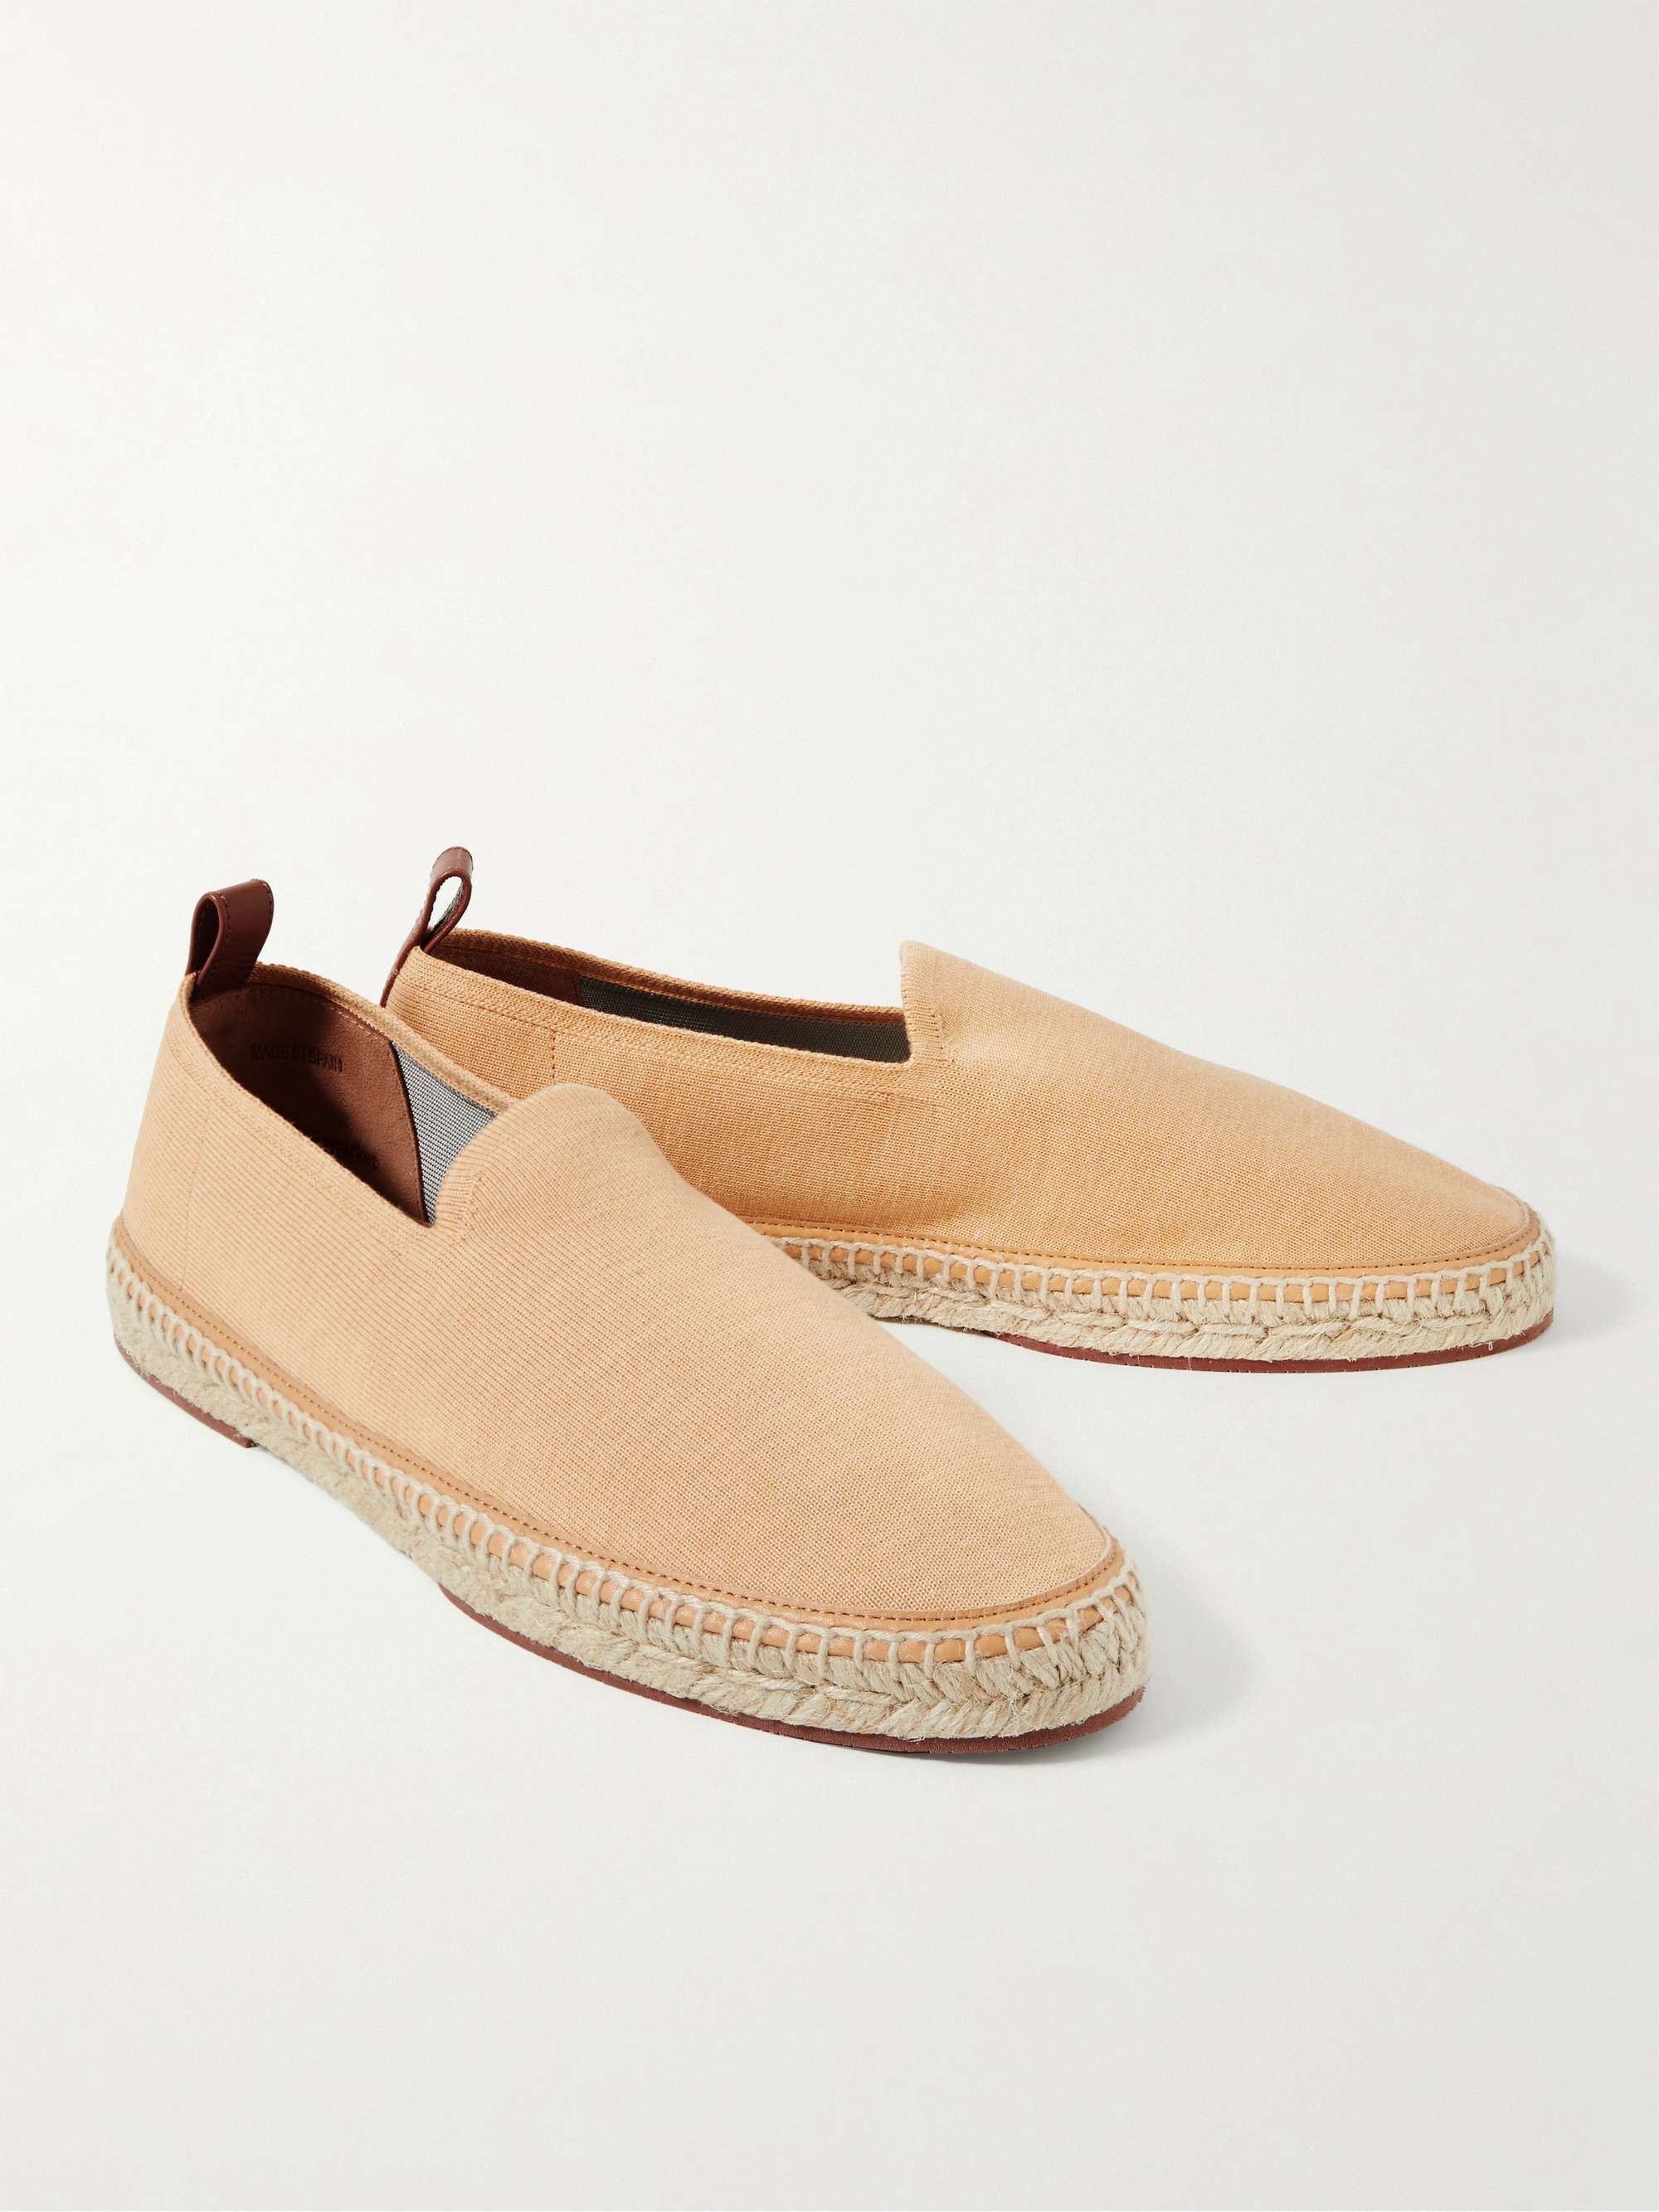 LORO PIANA Seaside Walk Leather-Trimmed Cotton and Silk-Blend Espadrilles